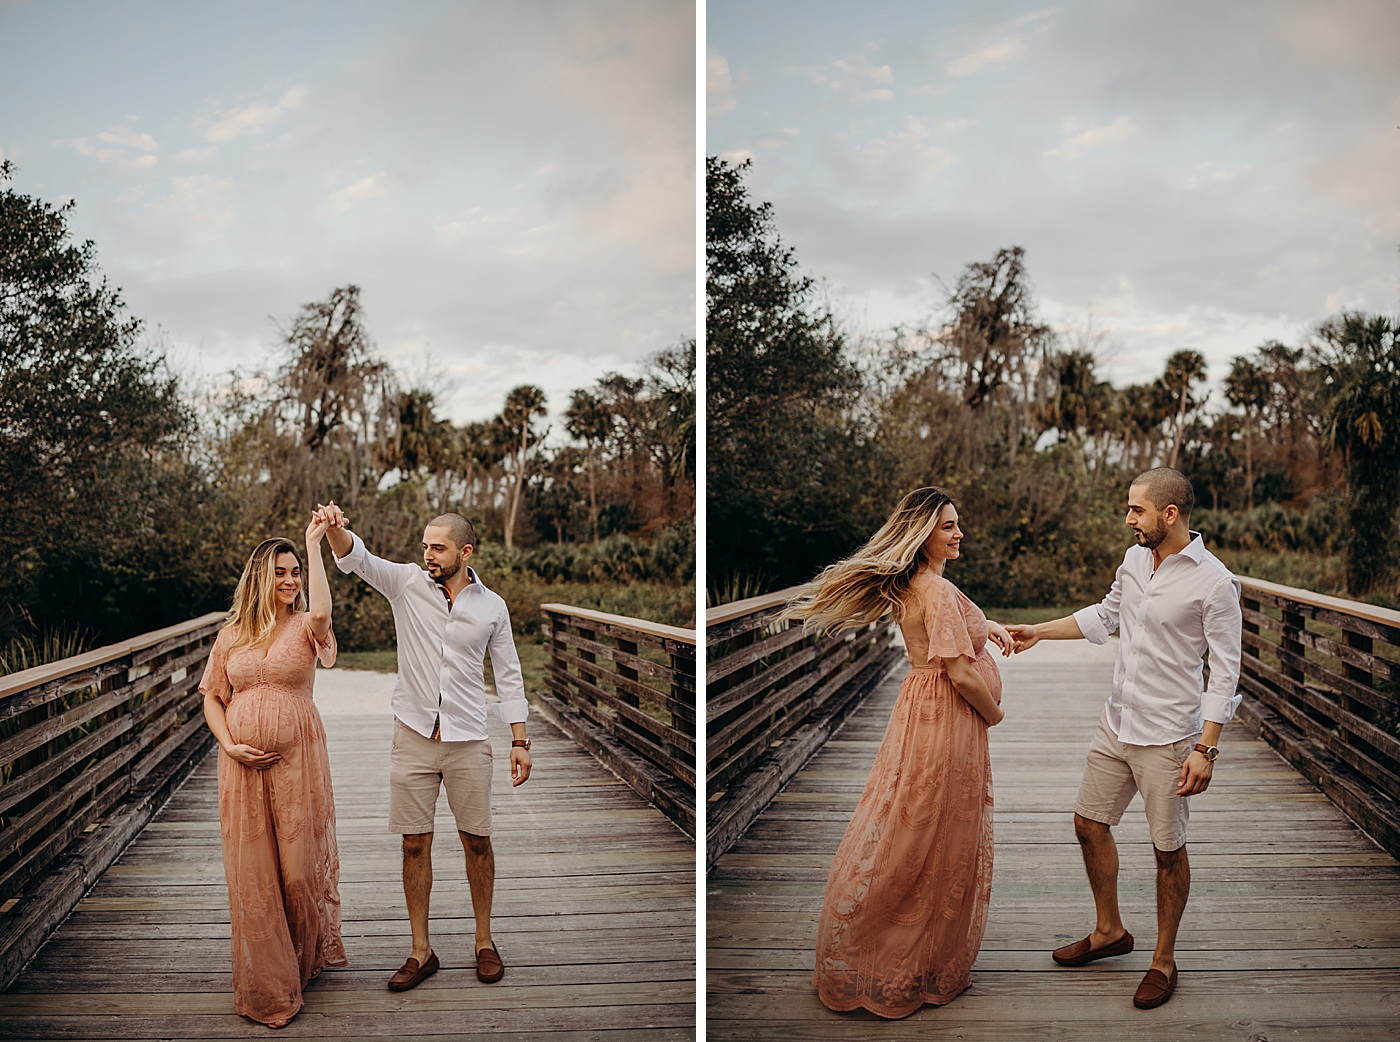 Couple Pirouetting on wood bridge Riverbend Park Maternity Photography by South Florida Family Photographer Maggie Alvarez Photography